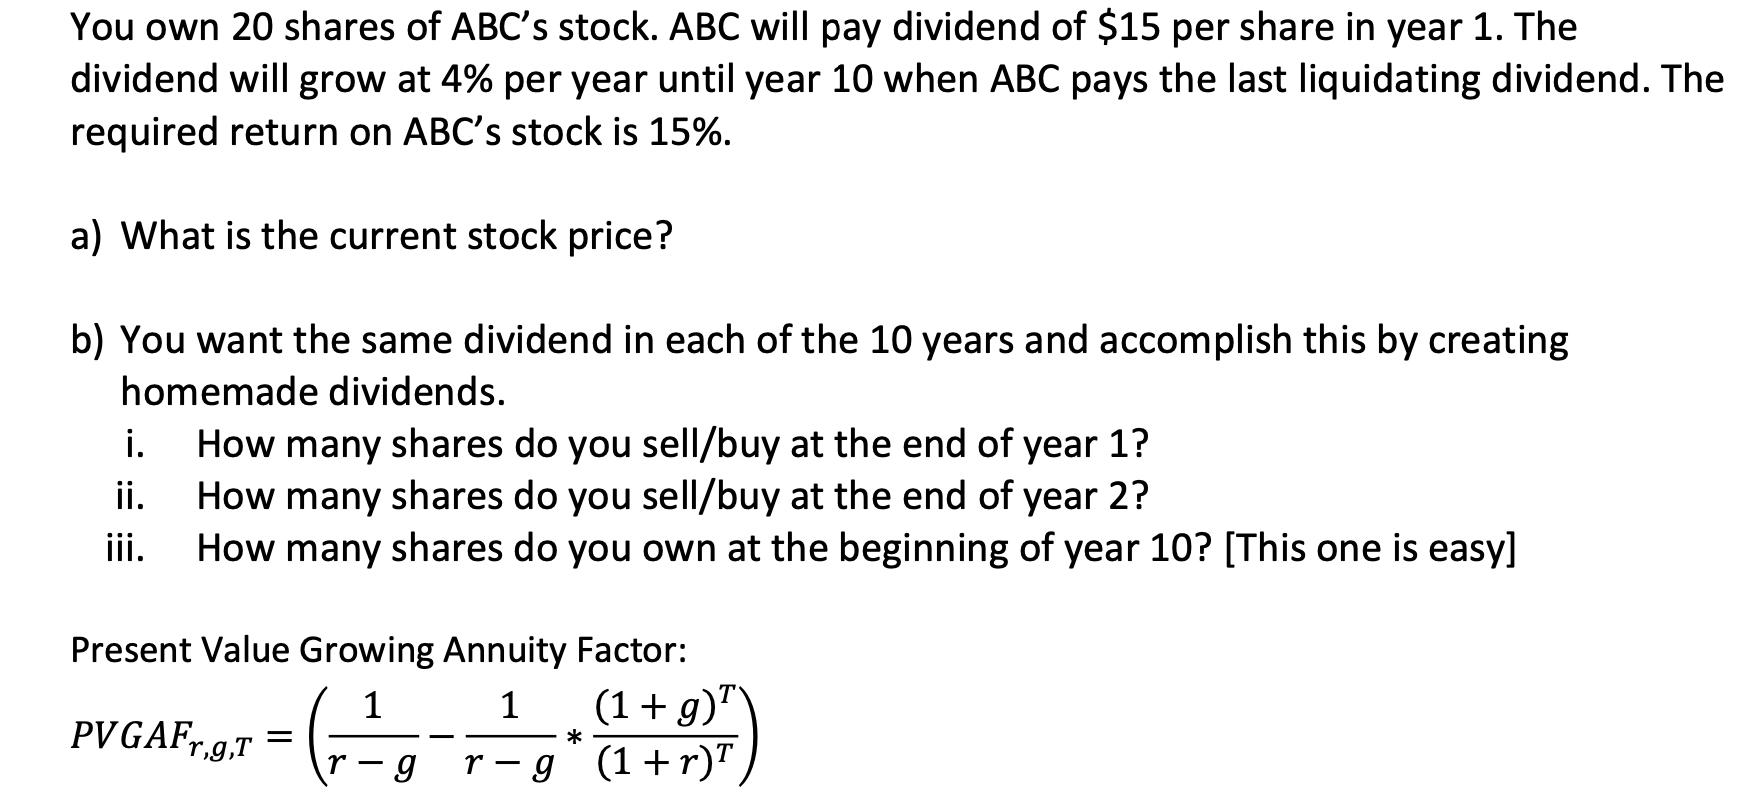 You own 20 shares of ABCs stock. ABC will pay dividend of ( $ 15 ) per share in year 1 . The dividend will grow at ( 4 